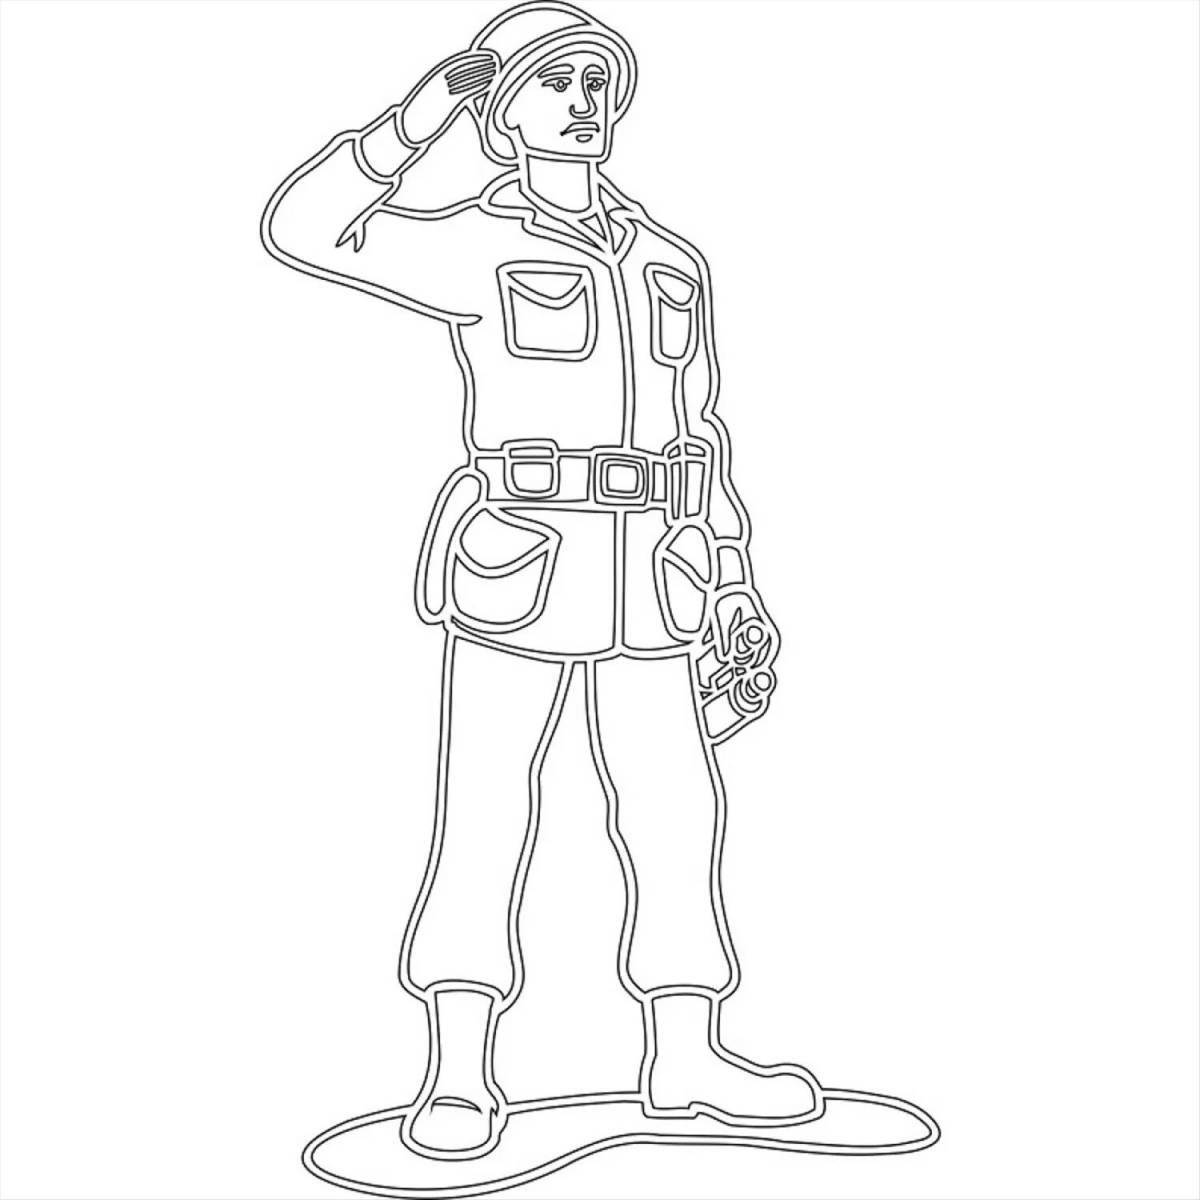 Adorable soldier coloring page for kids